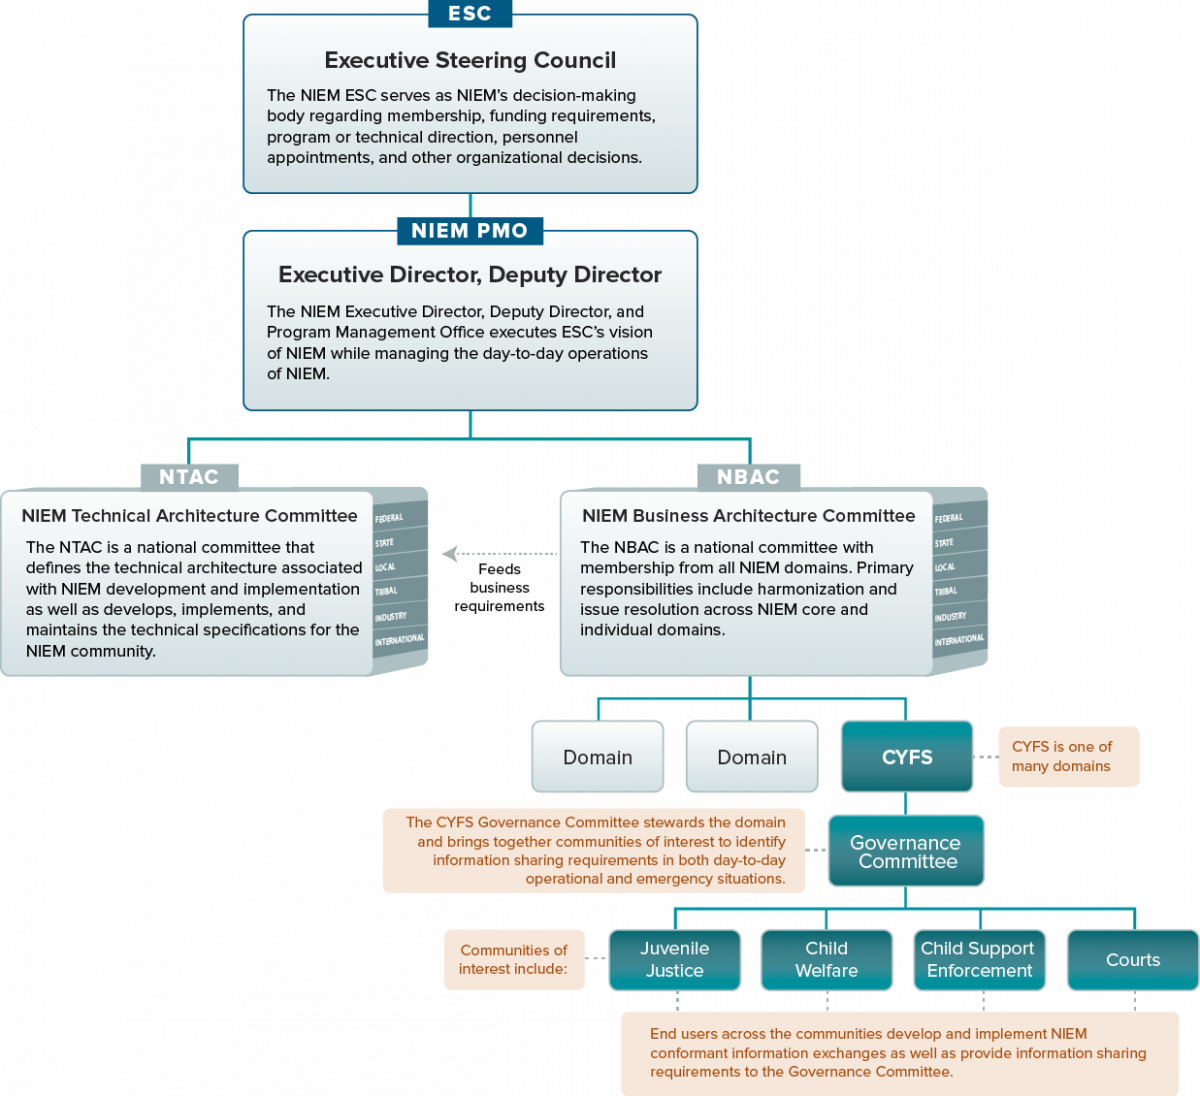 Picture of the governance framework for the Children, Youth, and Family Services (CFYS) domain. Within the CYFS domain, there is a governance committee. This committee stewards the domain and brings together communities of interest to identify information exchange business requirements. The CYFS communities of interest include but are not limited to: Juvenile Justice, Child Welfare, Child Support Enforcement, and Courts. End users across the communities develop and implement NIEM-based exchanges and provide new or updated information exchange requirements to the domain governance committee. The domain governance committee determines who represents the domain on the NBAC.